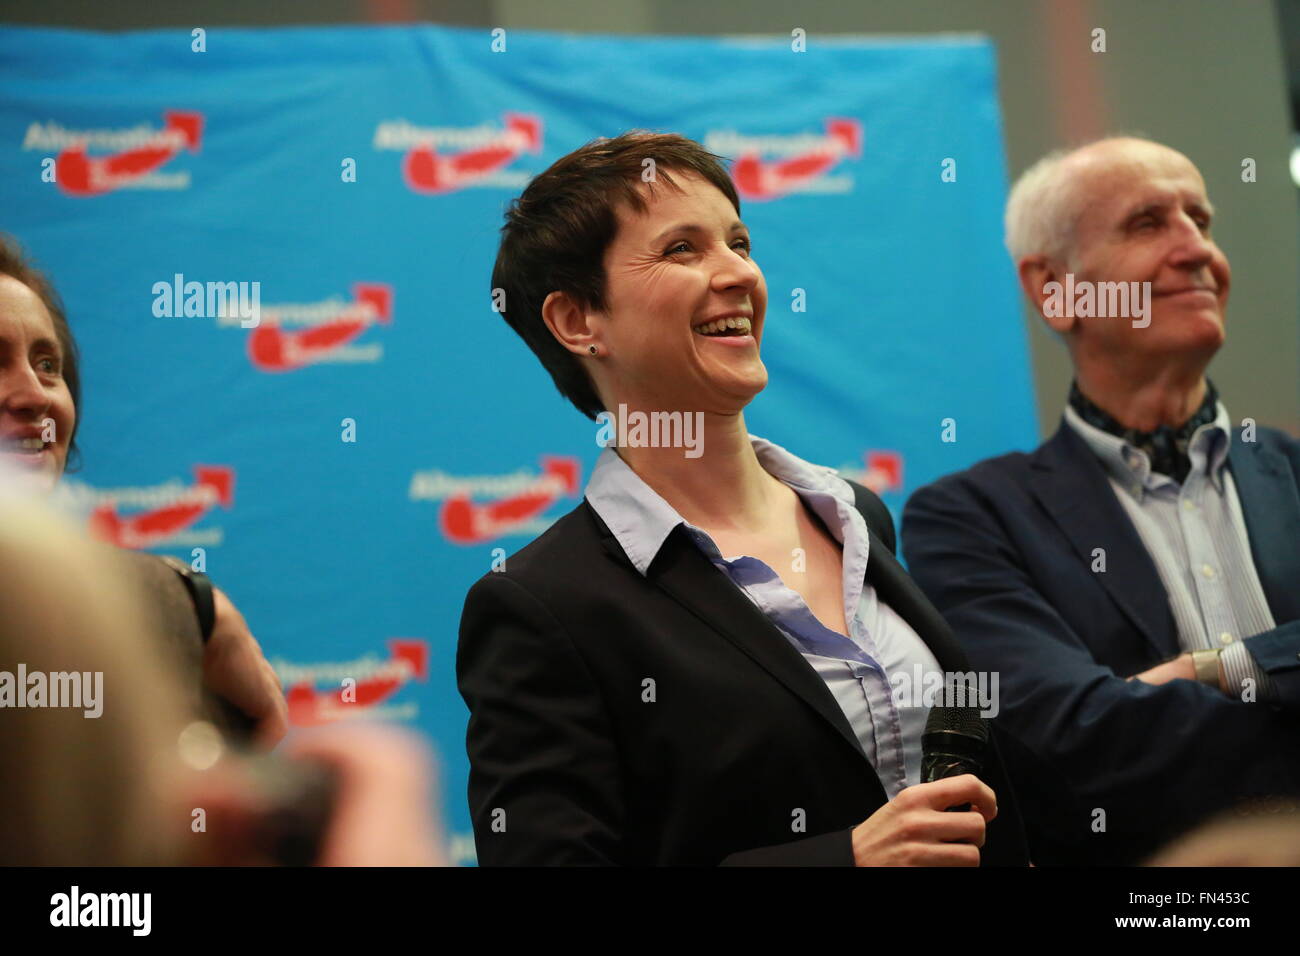 Berlin, Germany. 13th Mar, 2016. Party leader Frauke Petry during the election night of AfD (party) at AO hostel in Berlin's Lichtenberg district to the state elections in Baden-Württemberg, Rheinland-Pfalz and Sachsen-Anhalt. © Simone Kuhlmey/Pacific Press/Alamy Live News Stock Photo